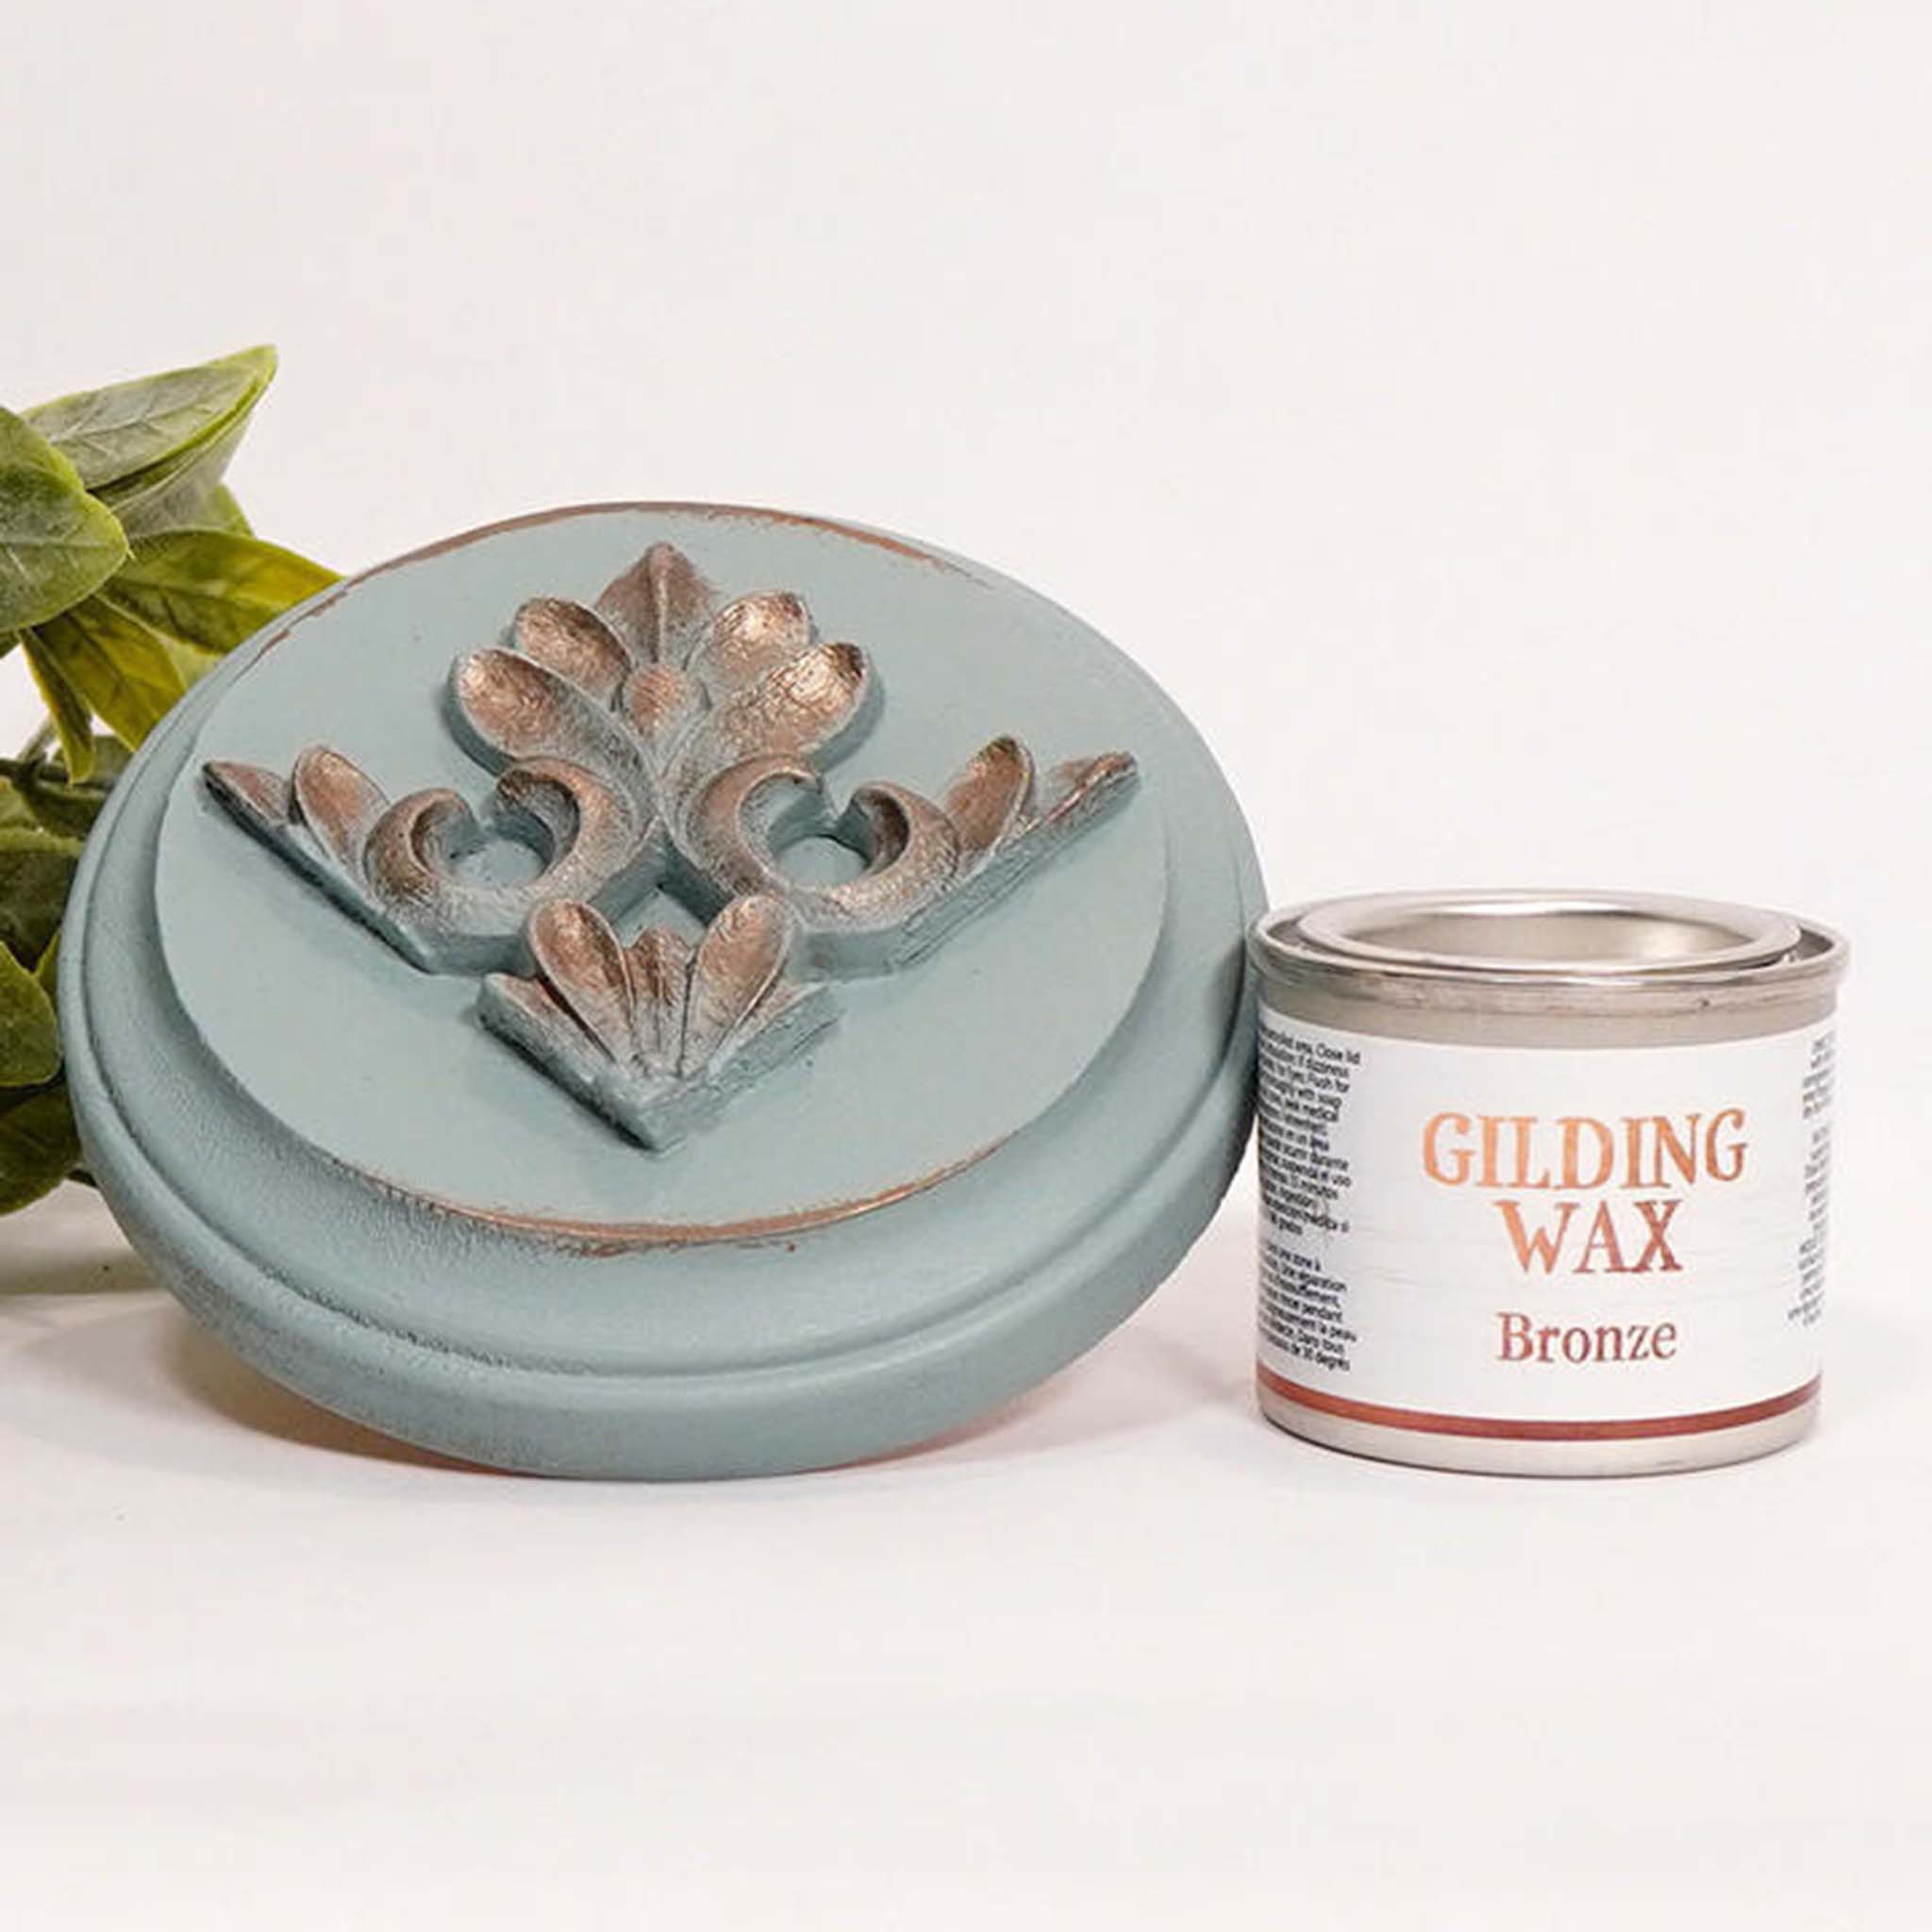 A can of Dixie Belle's Bronze Gilding wax is next to a light blue painted round wood sample. The wood sample has an ornate silicone mold casting that features the bronze gilding wax on it.